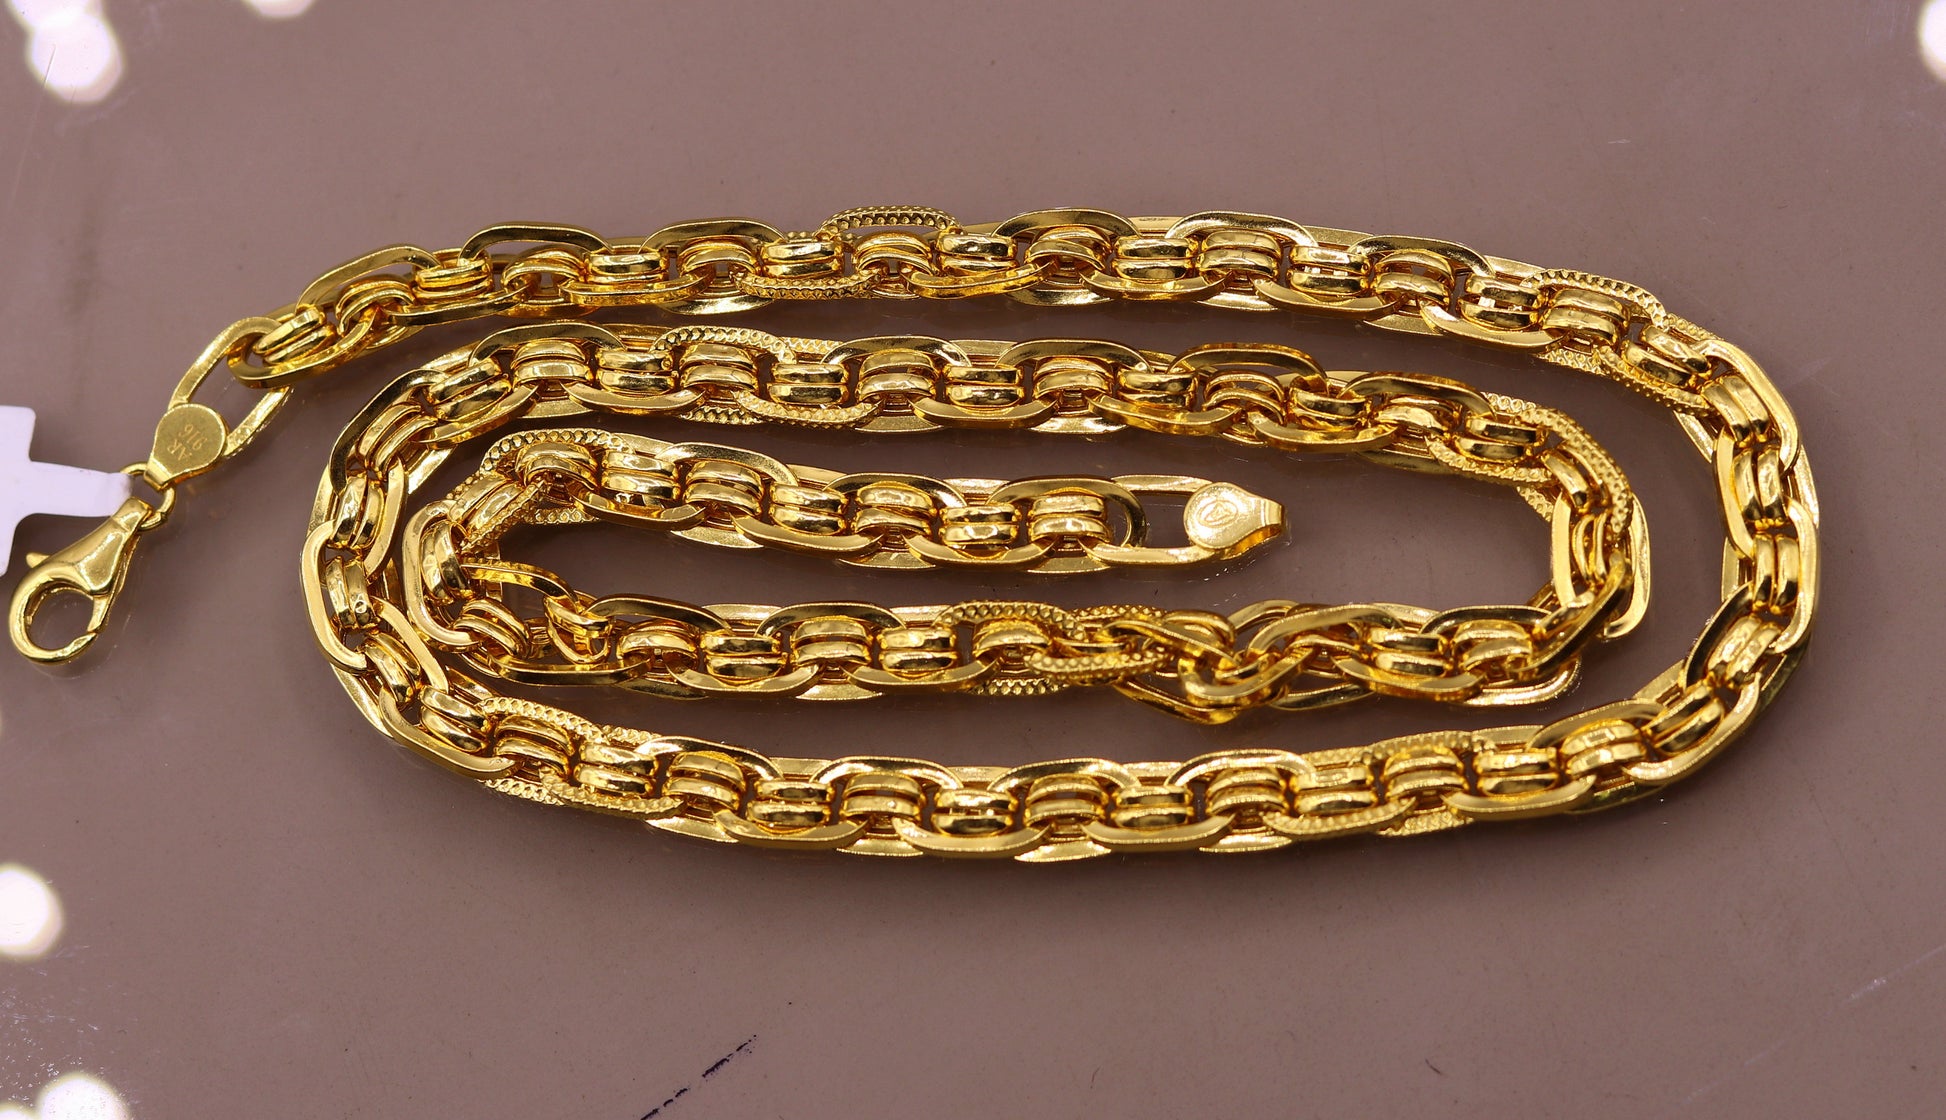 22karat yellow gold fabulous handmade designer chain necklace link chain stylish unisex jewelry from india ch215 - TRIBAL ORNAMENTS